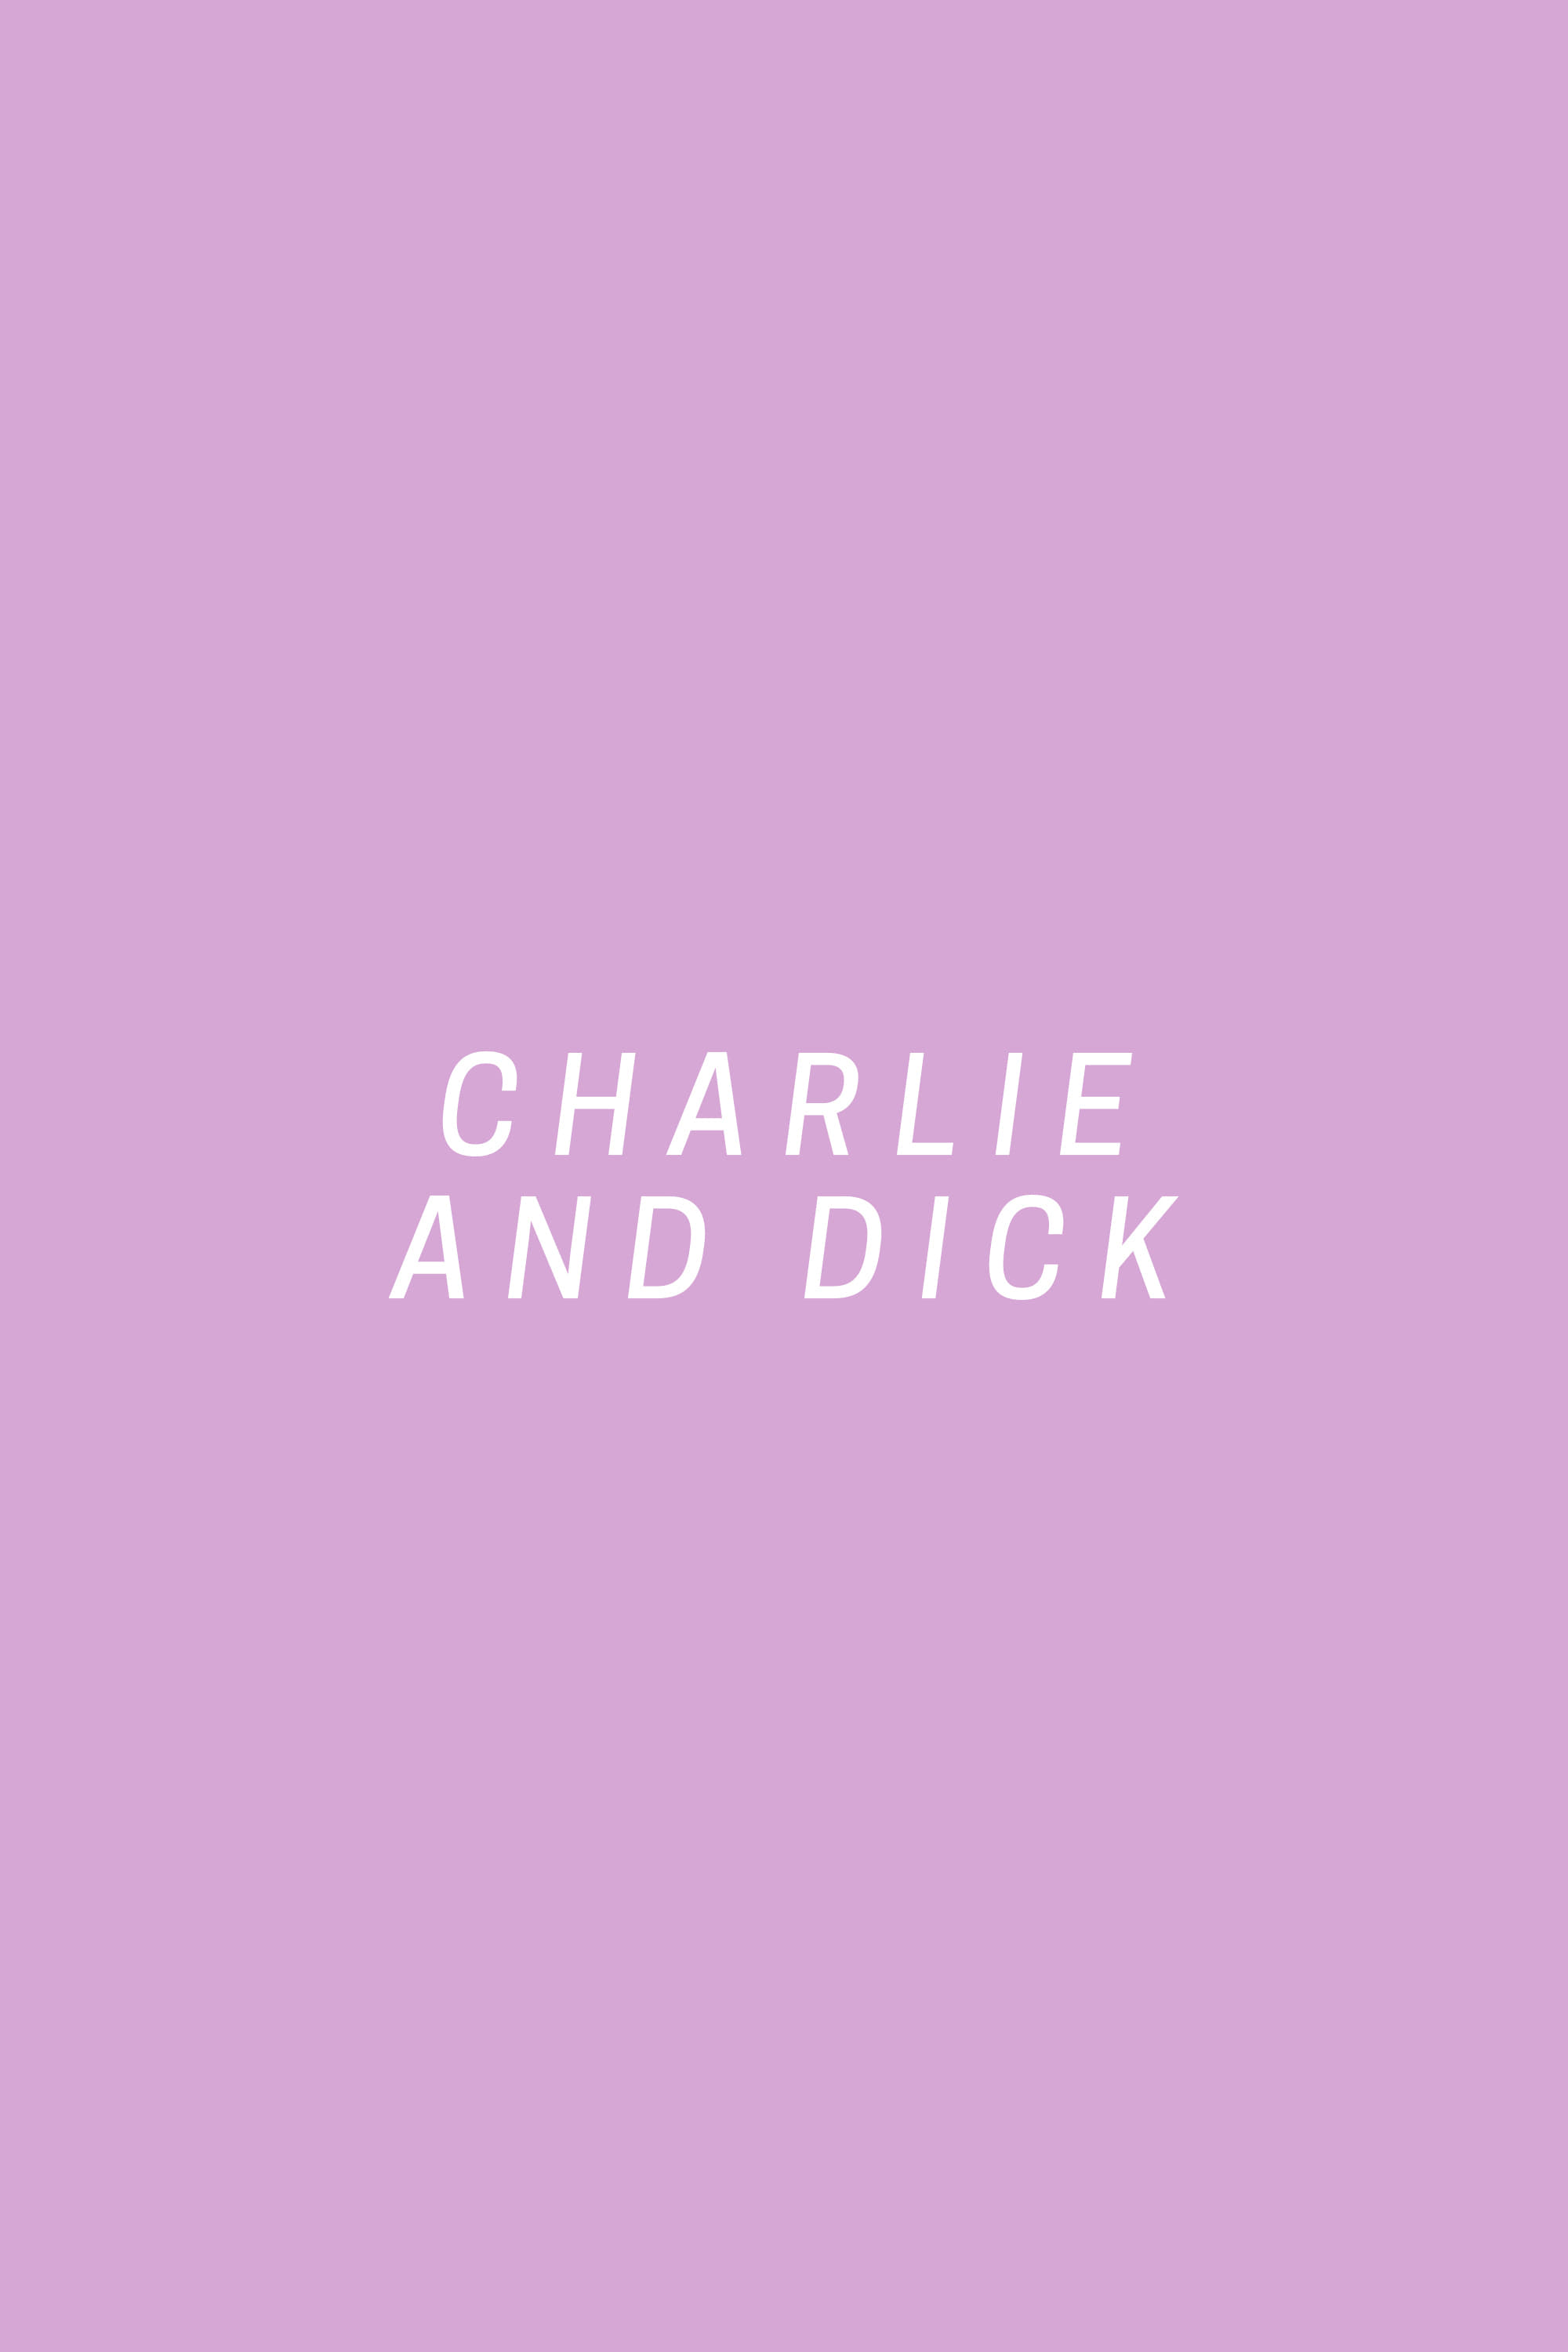 Charlie and Dick